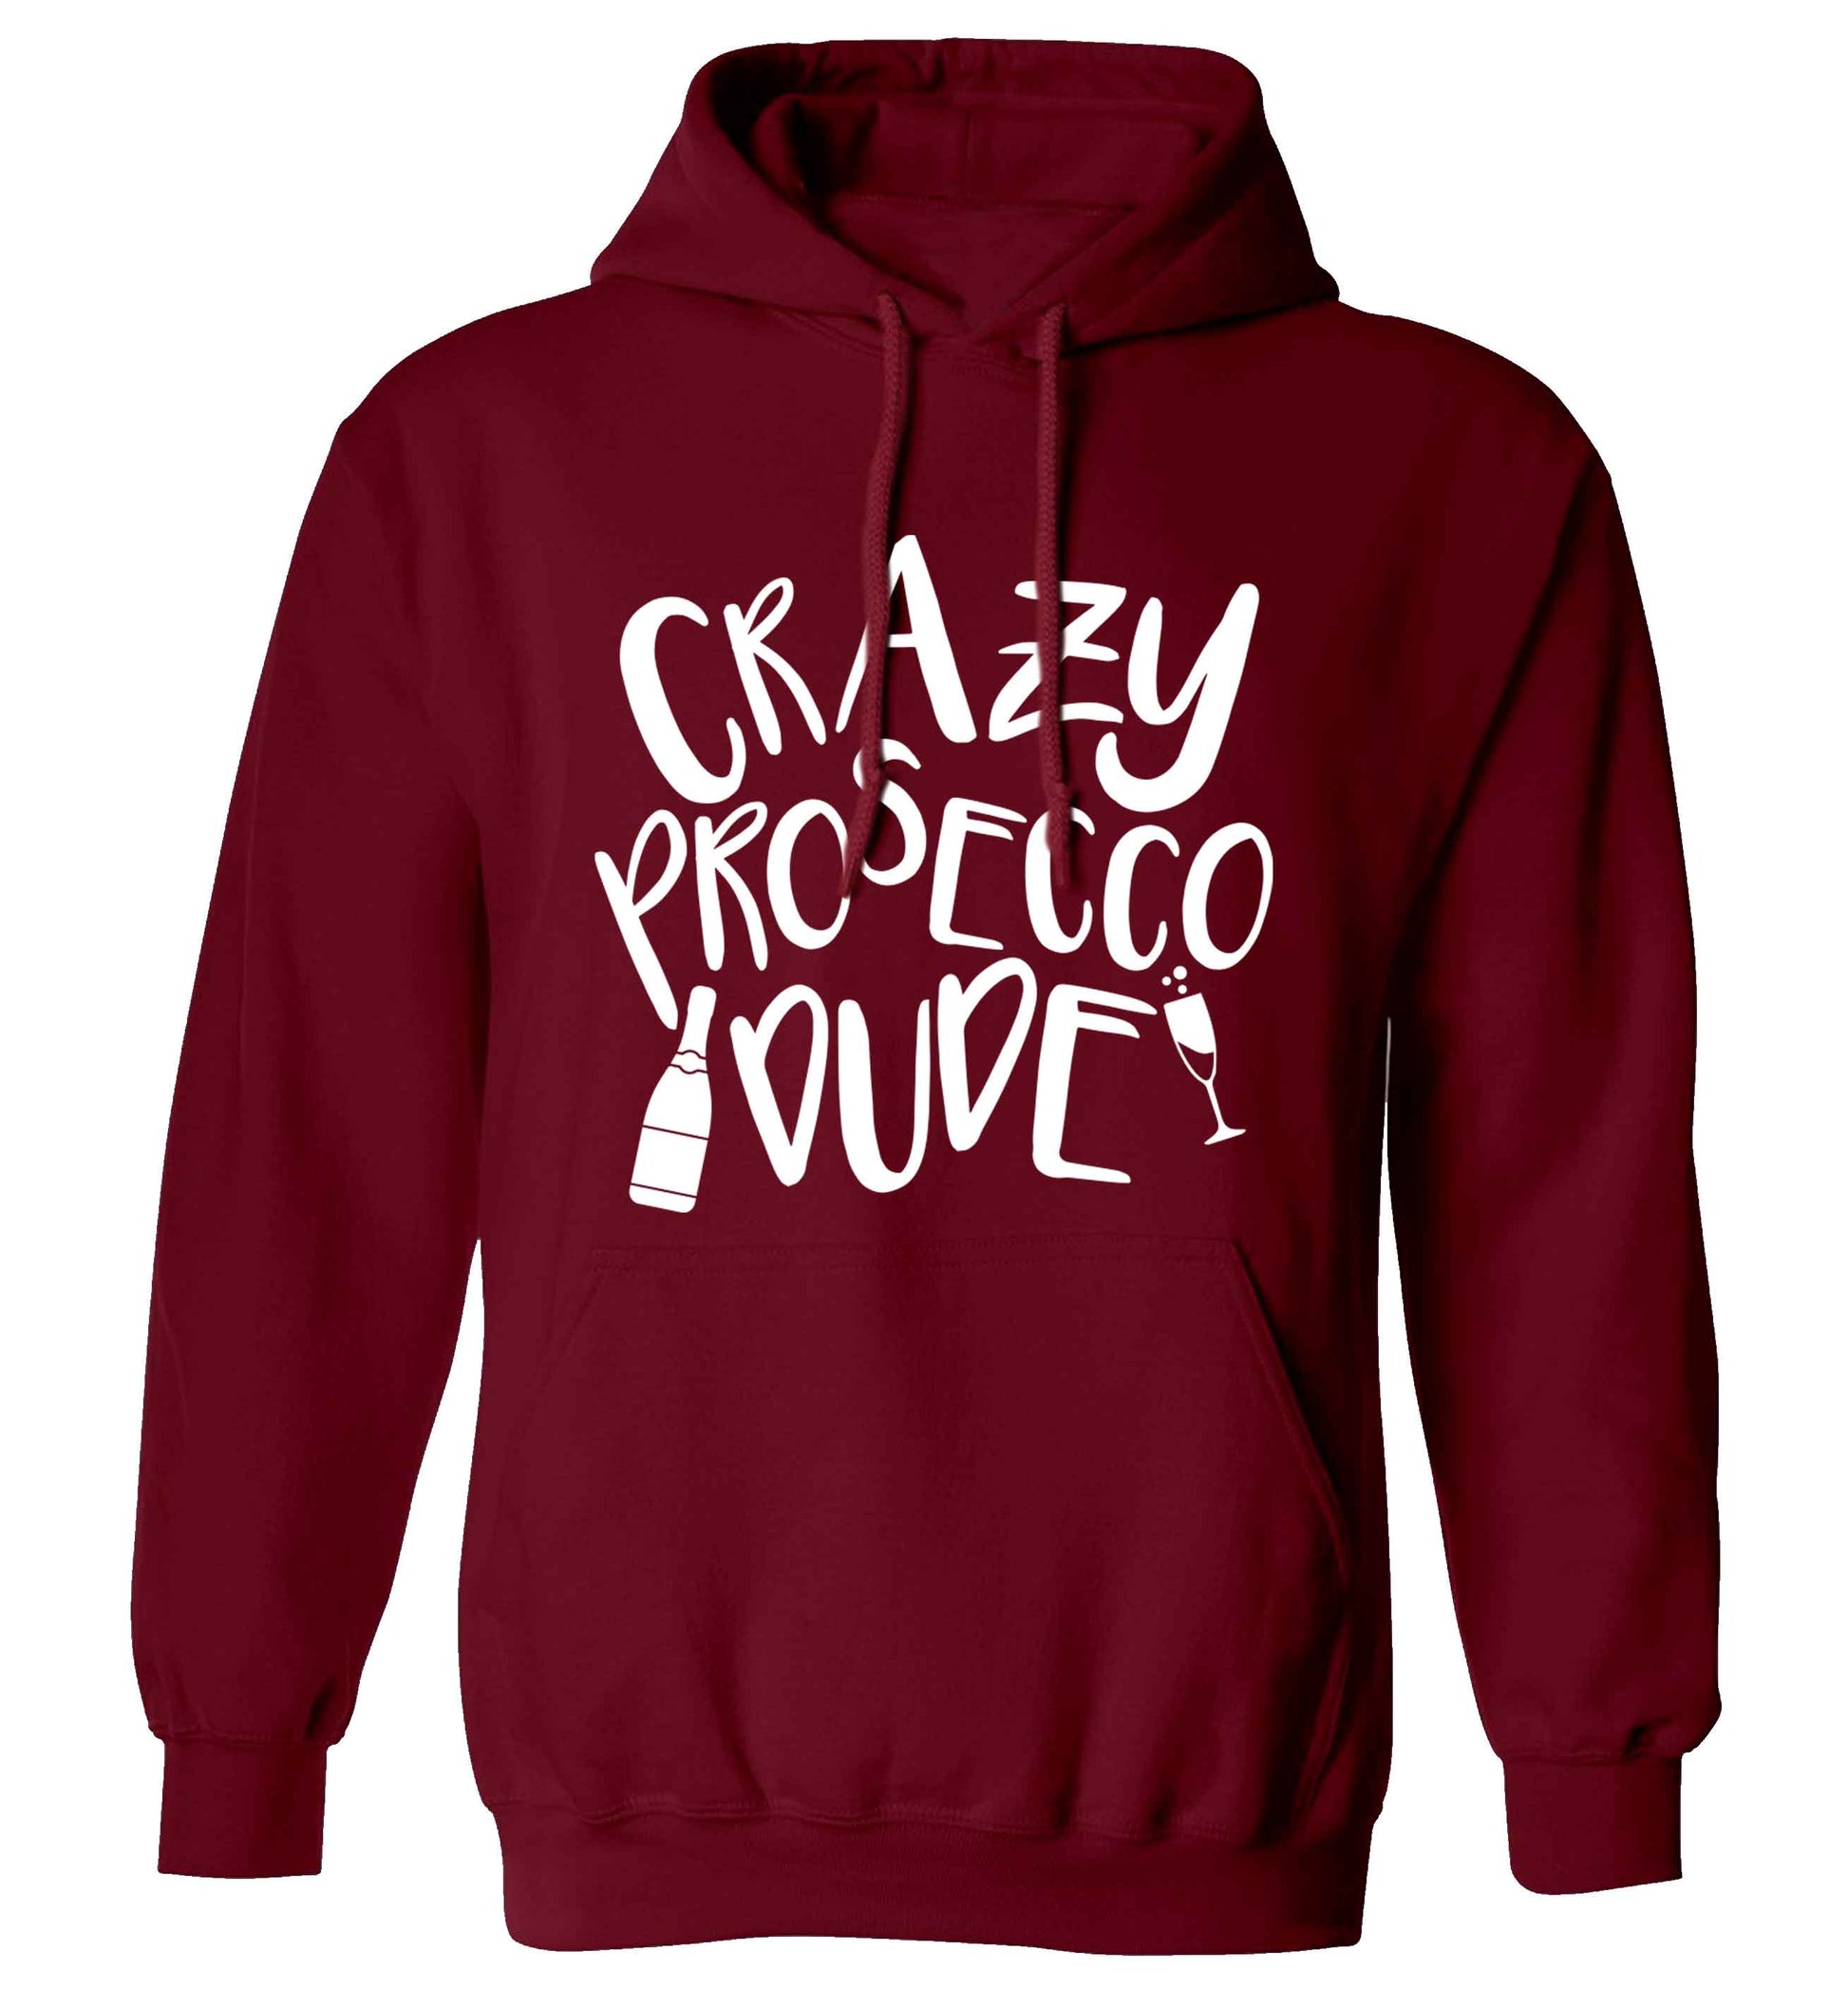 Crazy prosecco dude adults unisex maroon hoodie 2XL